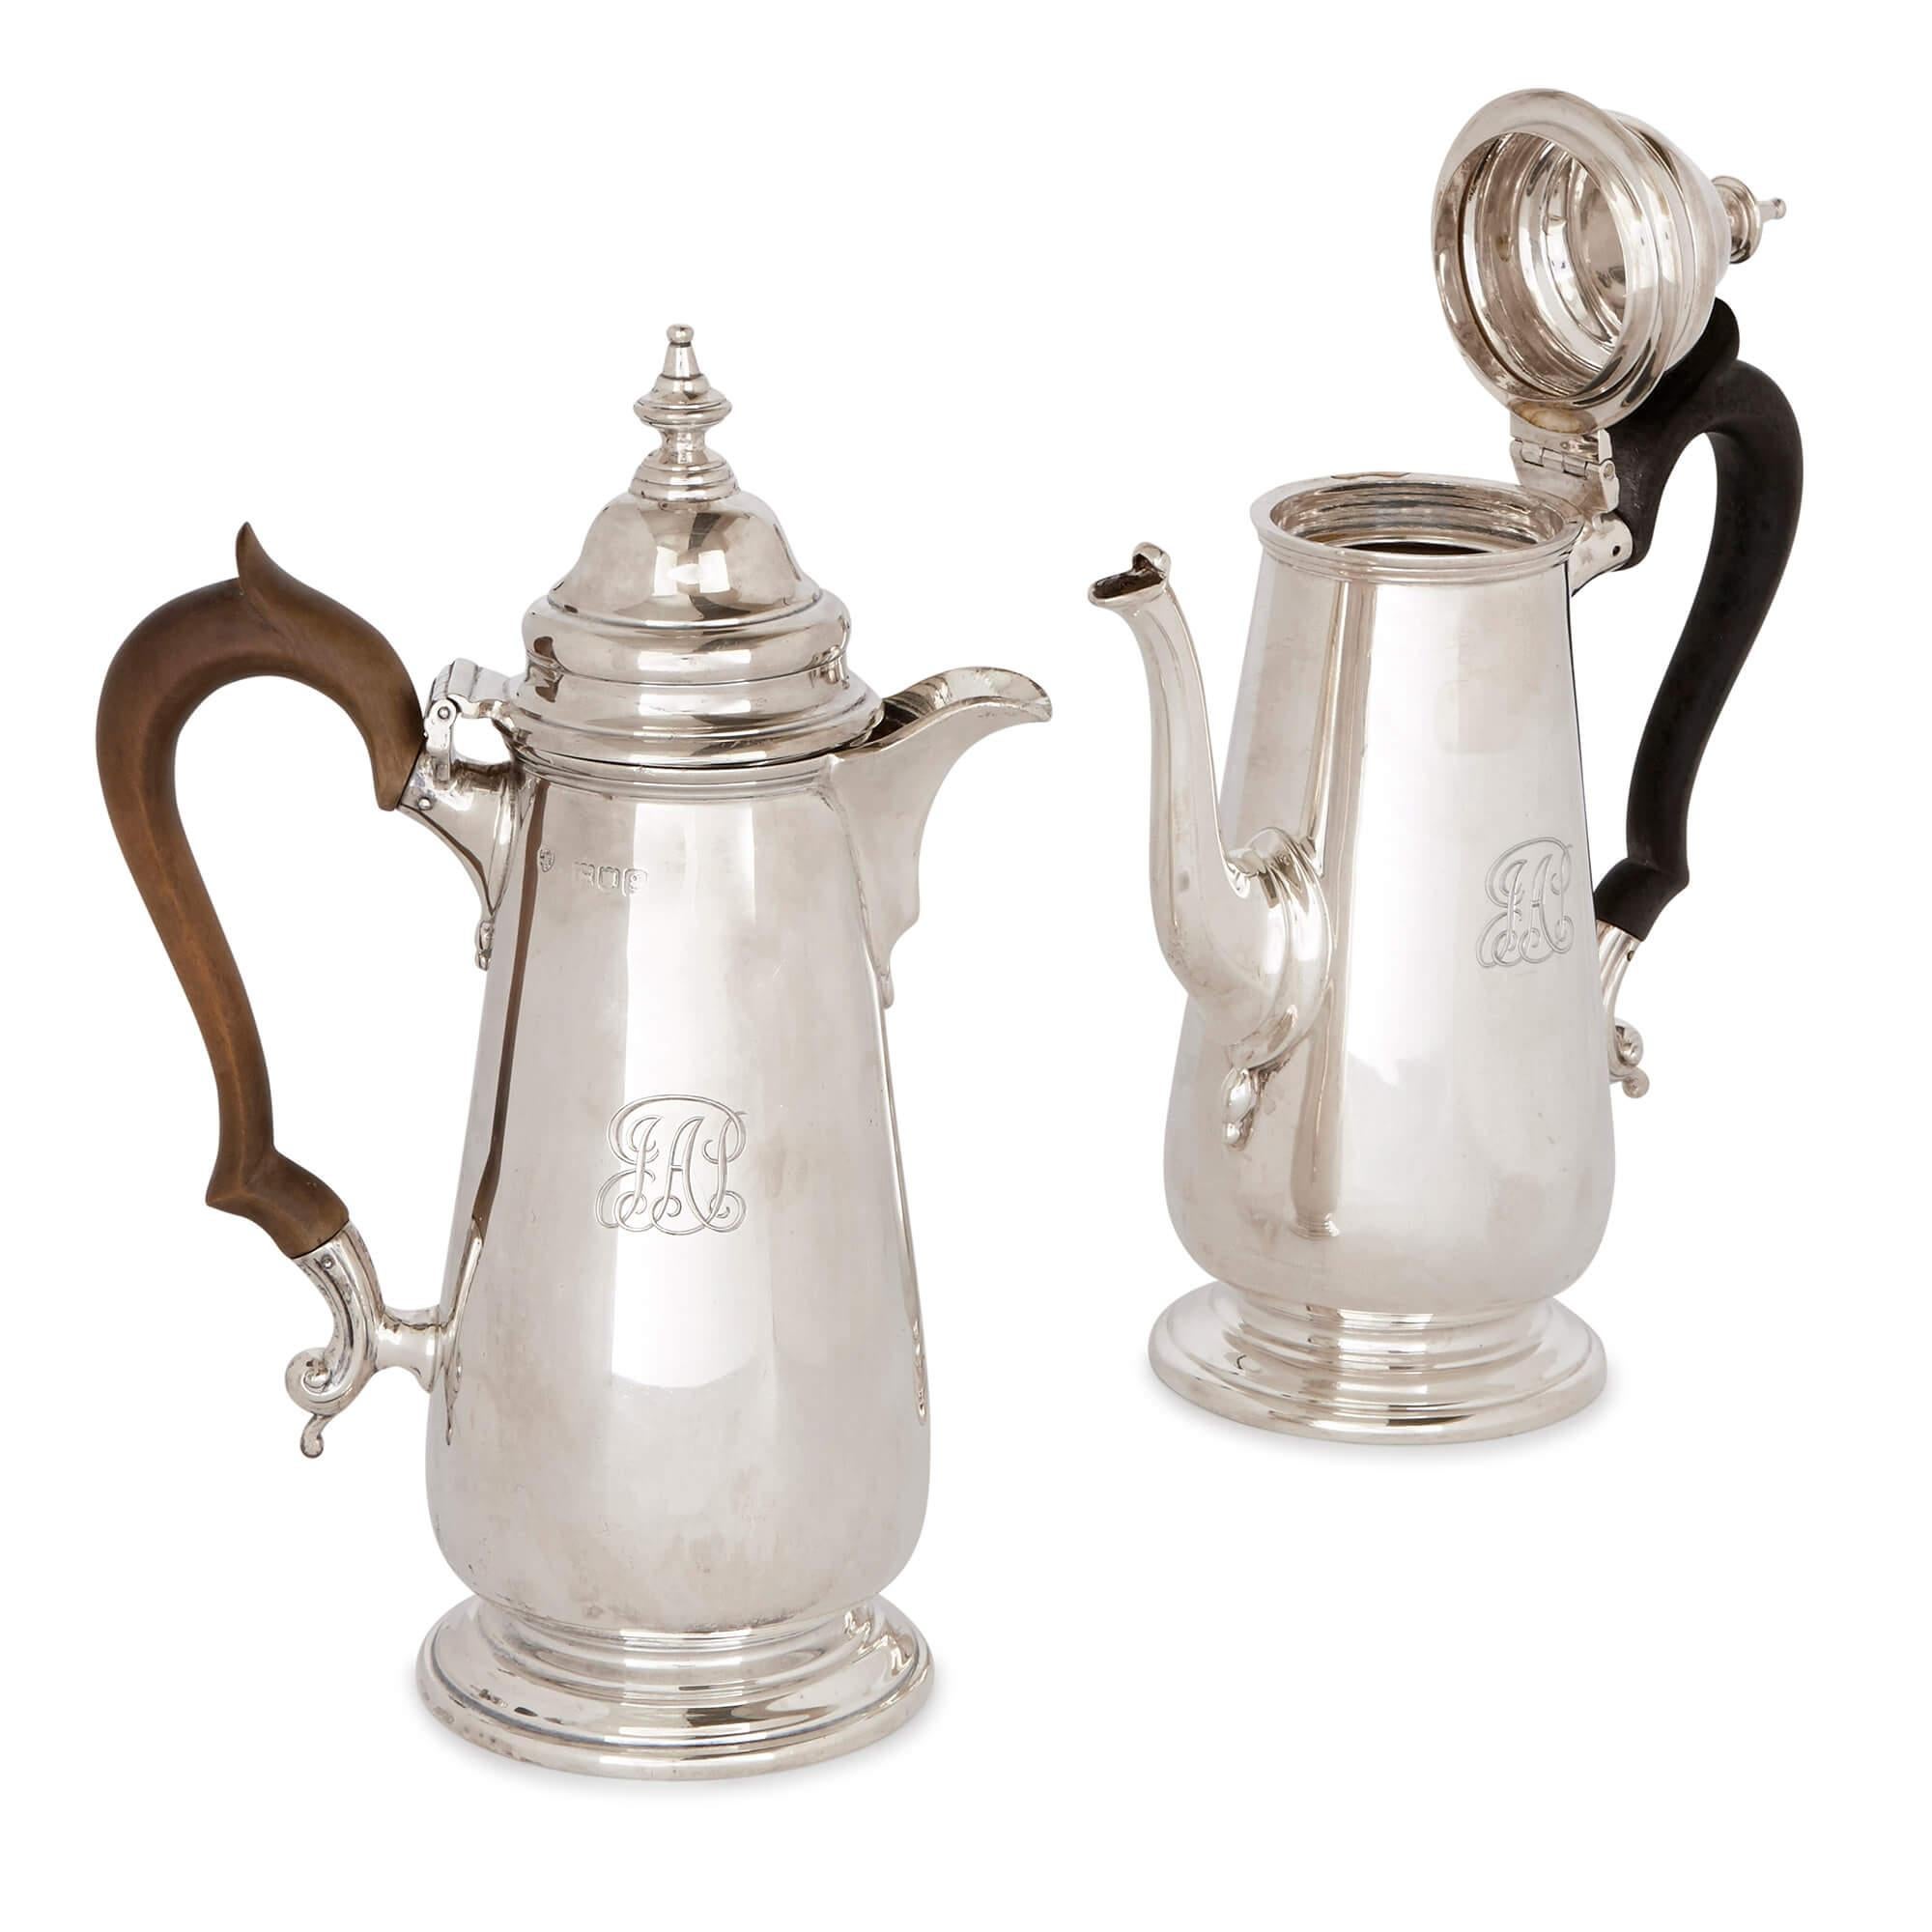 This classic English sterling silver coffee set is a simplified, elegant piece of artistry dating from the Edwardian period of the early 20th century. The set contains two coffee pots, a milk jug and a sugar bowl and spoon, all of which are